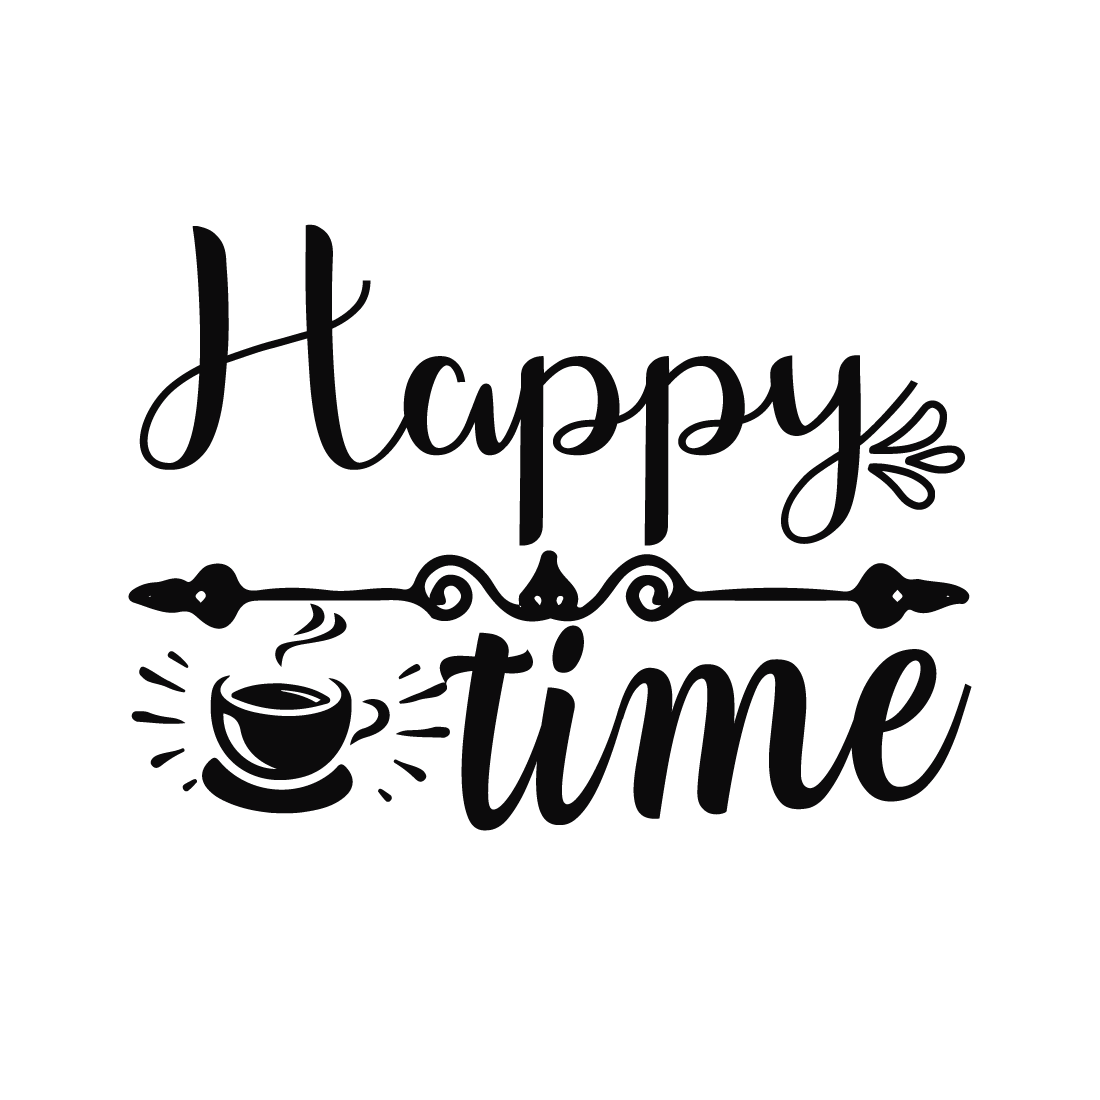 Happy Time preview image.